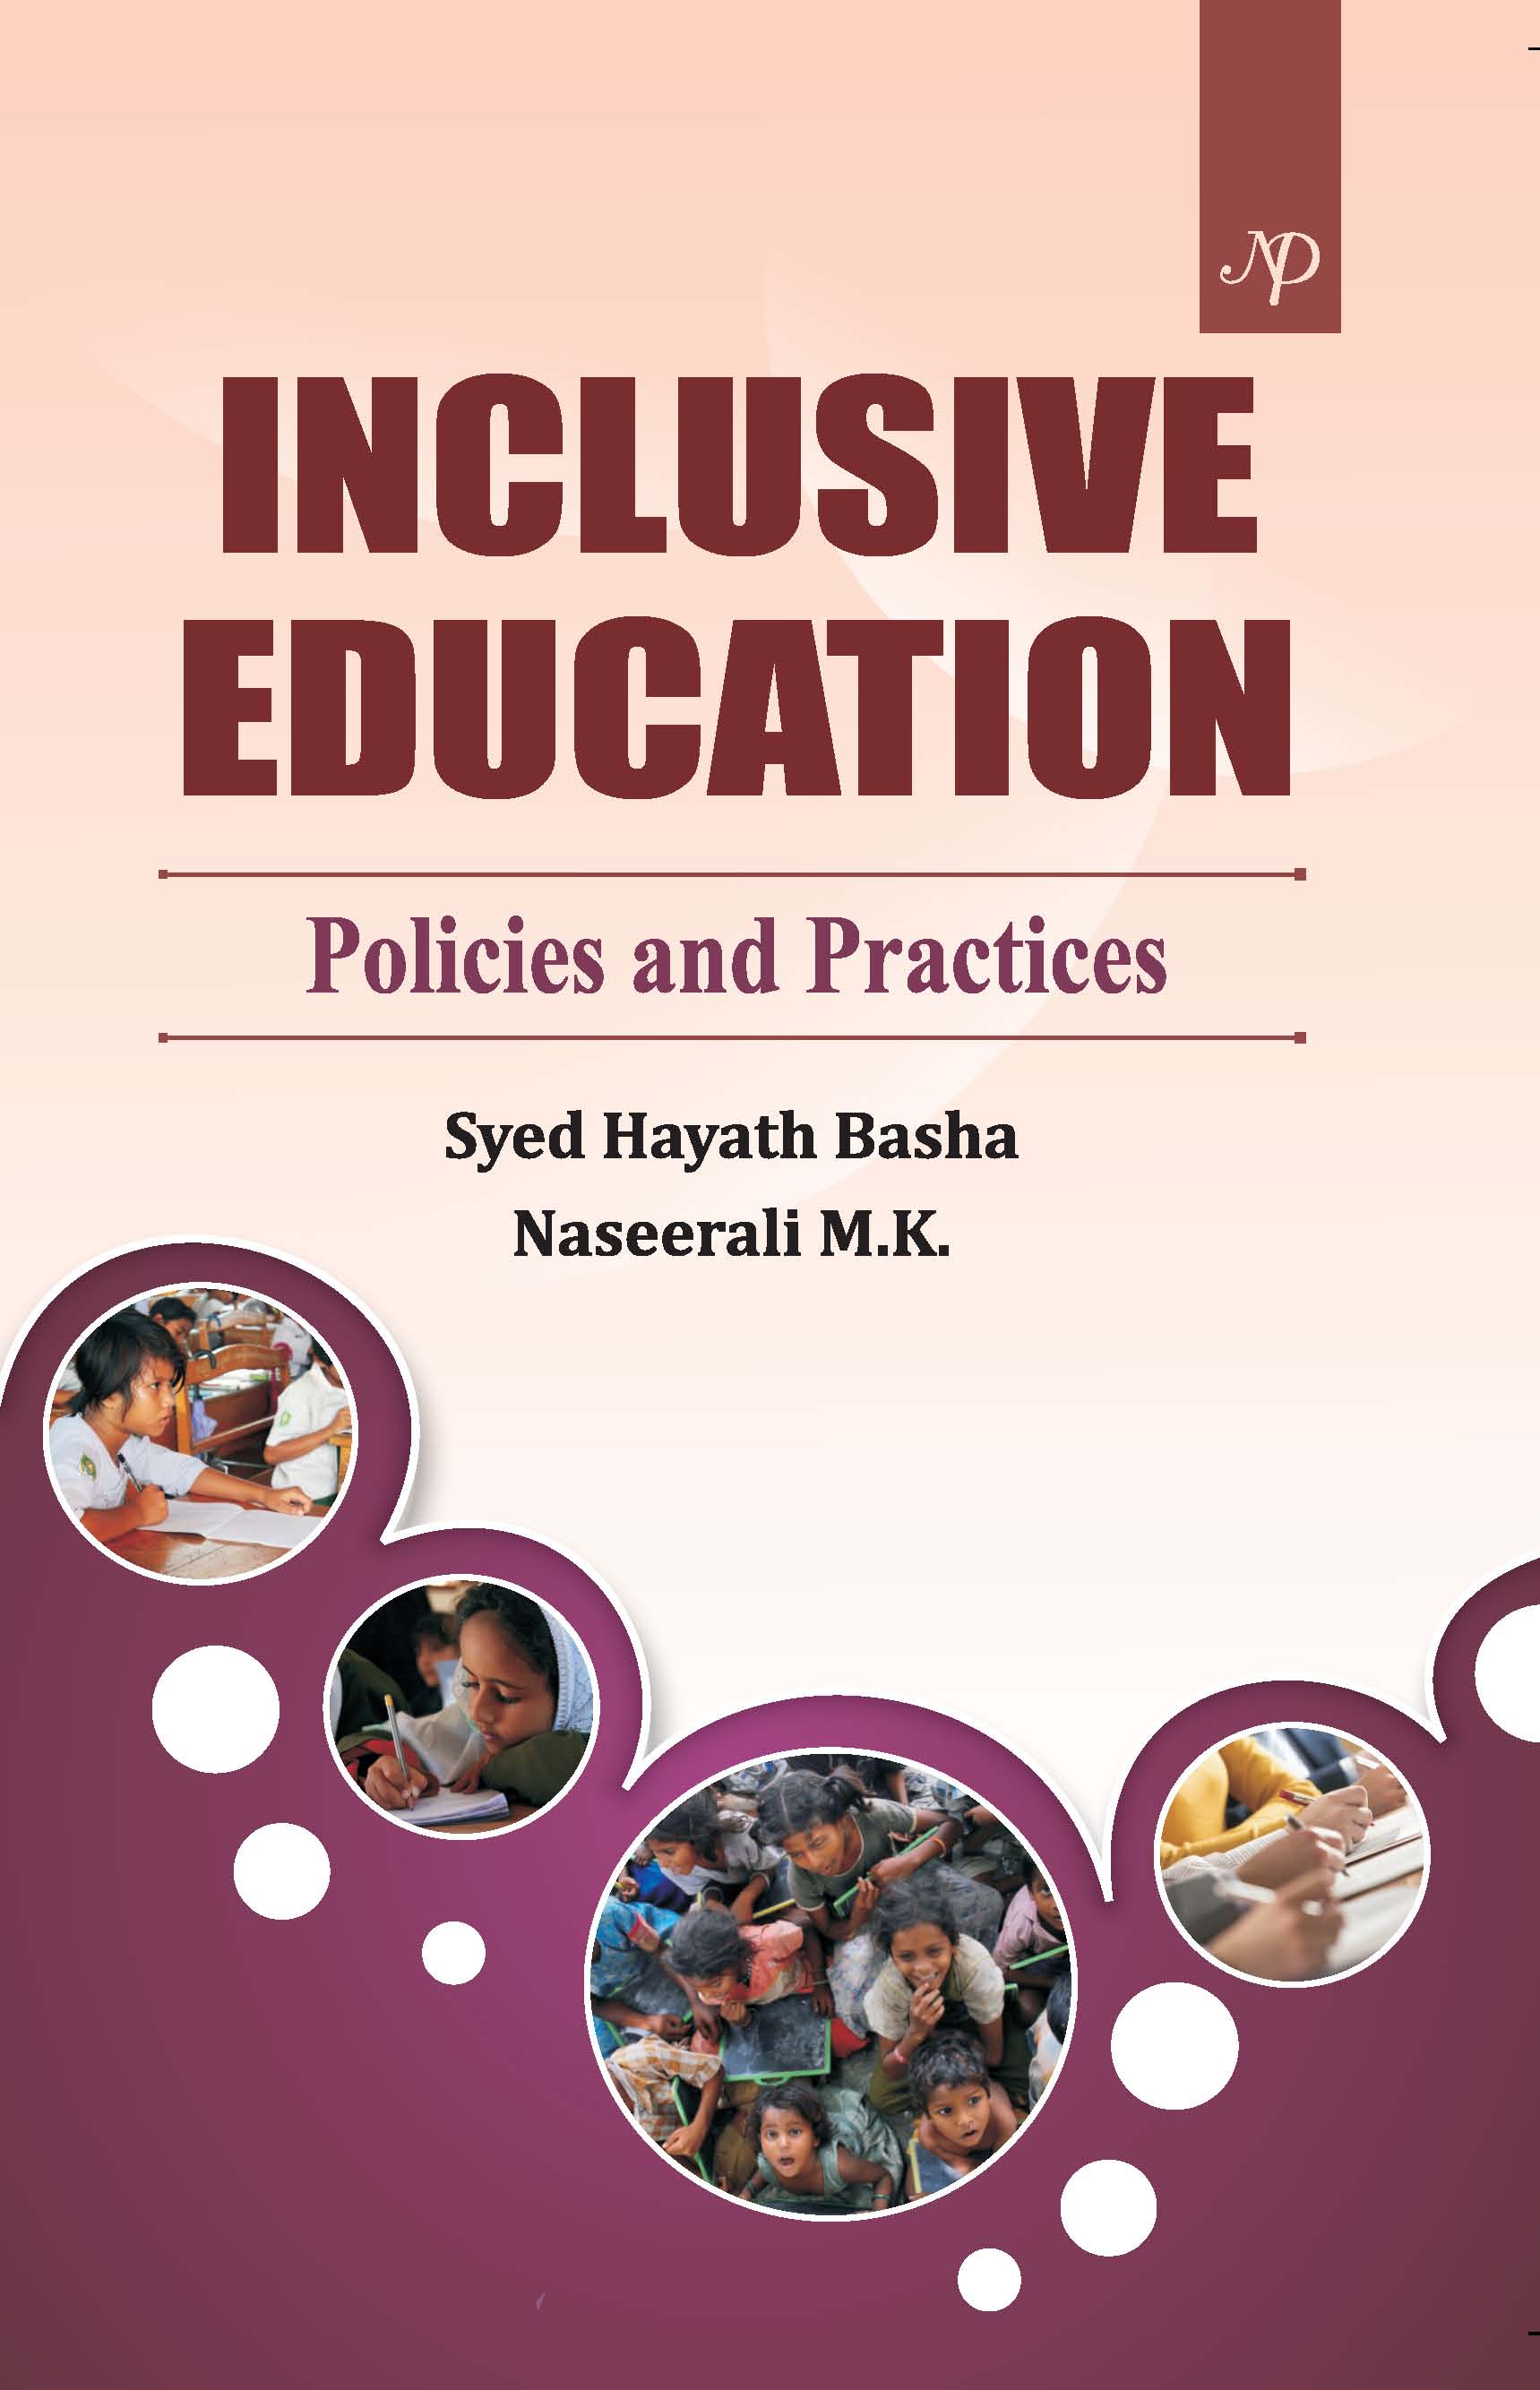 Inclusive Education: Policies and Practices